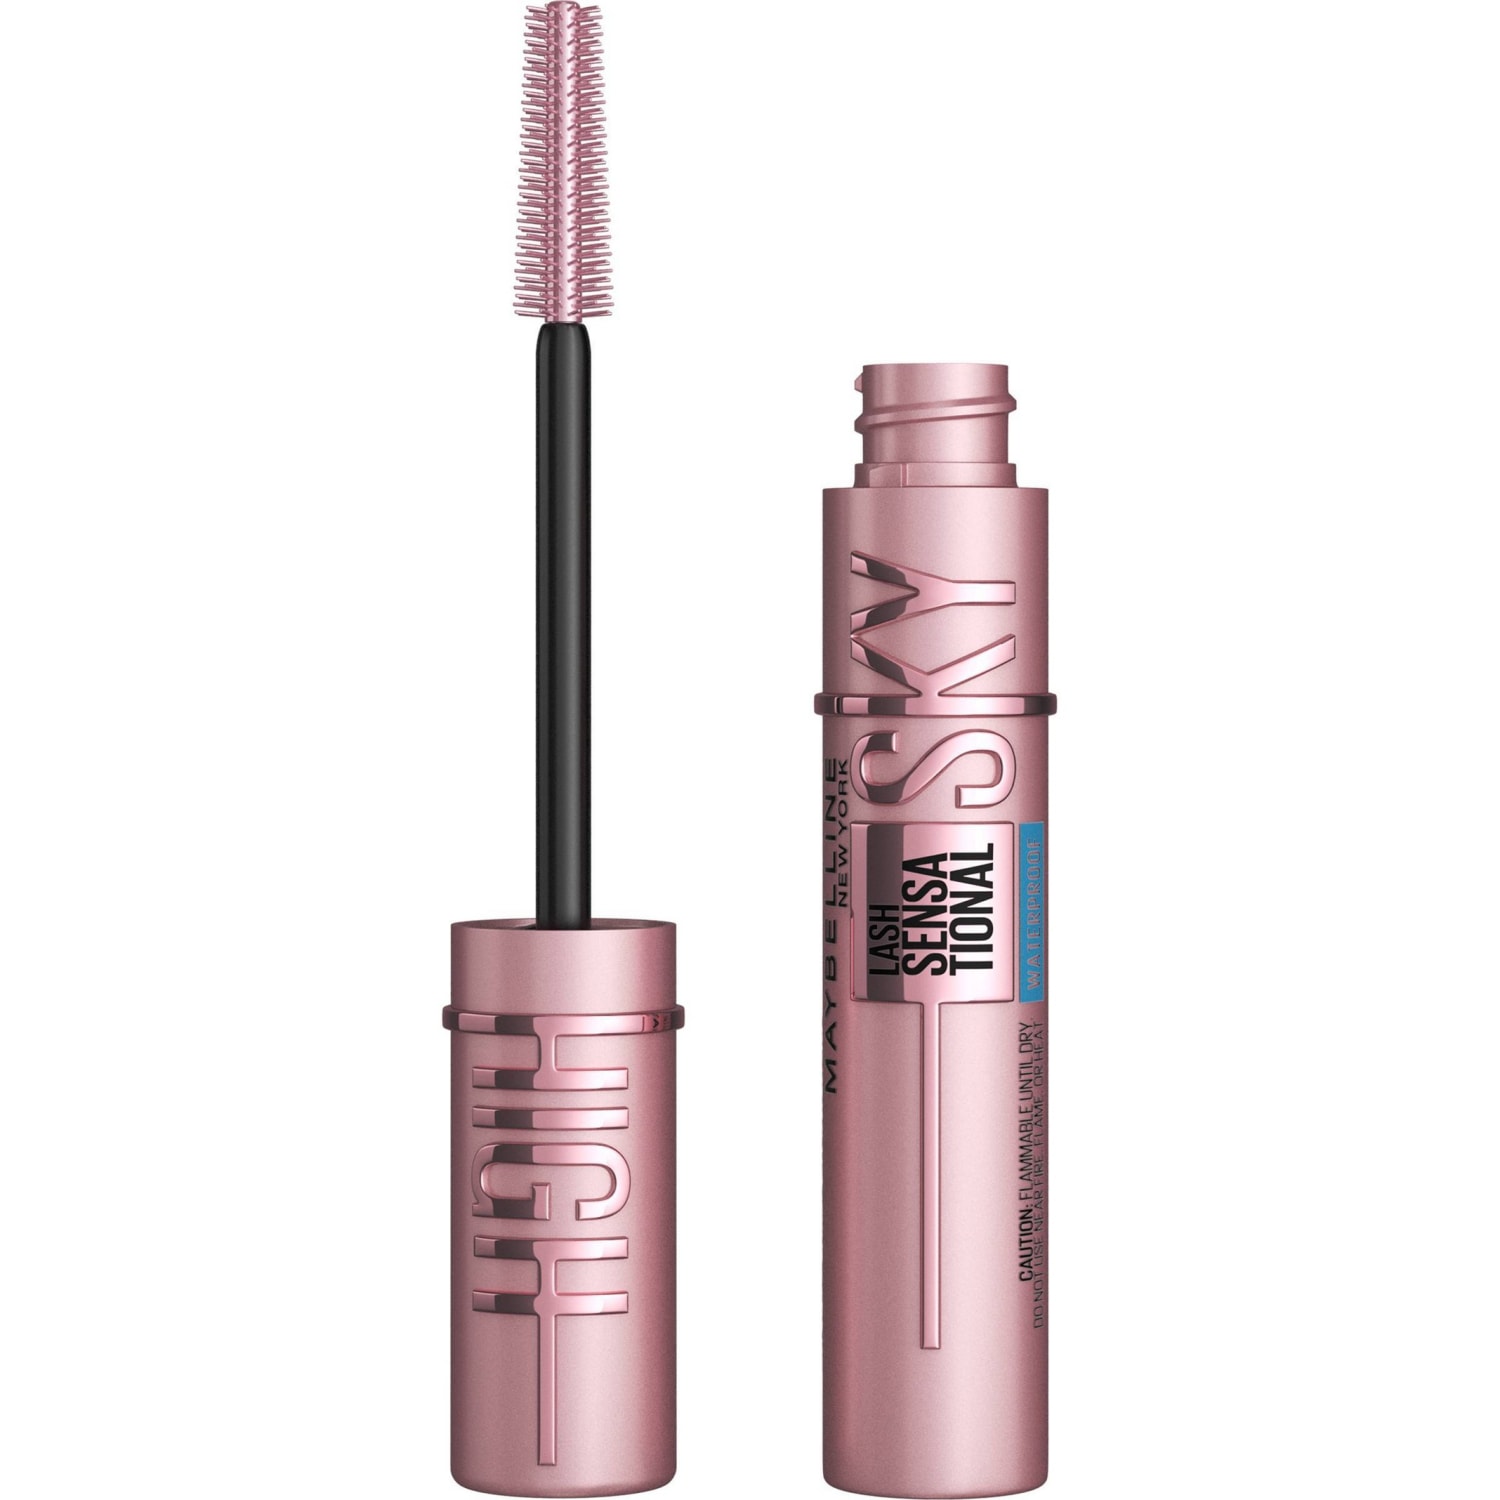 12 best waterproof mascaras for smudge-proof lashes - TODAY